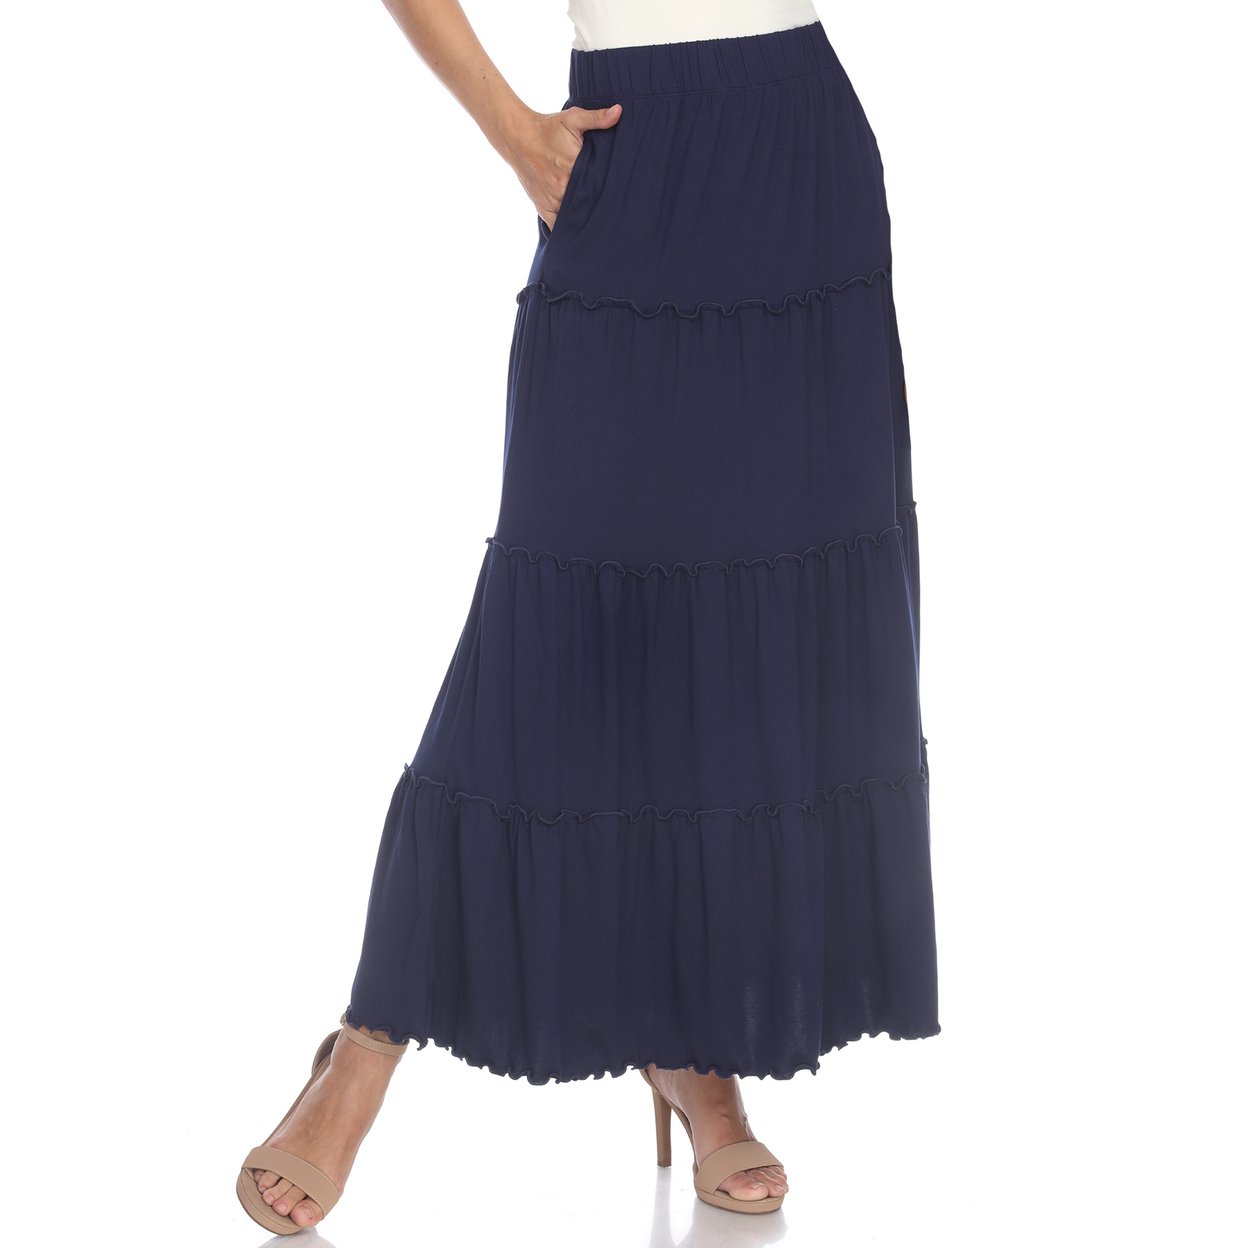 White Mark Women's Tiered Maxi Skirt With Pockets - Olive, Medium